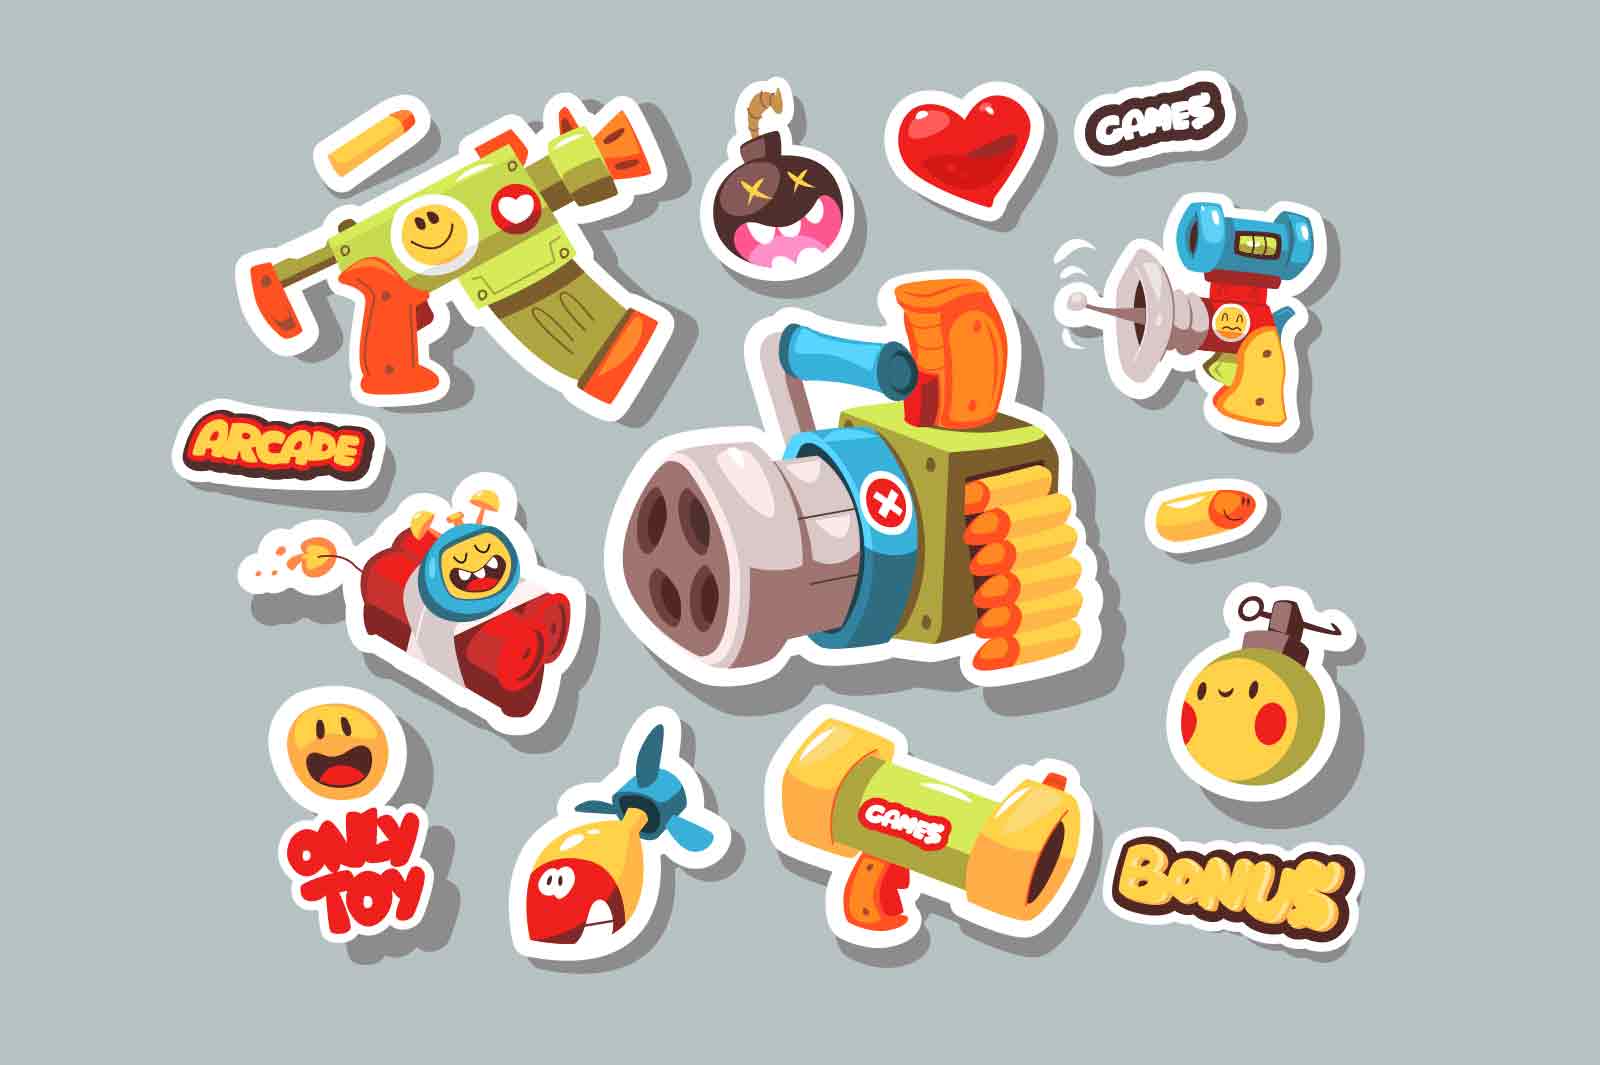 Weapons for games stickers set vector illustration. Guns, explosives, bombs and smiles flat style concept